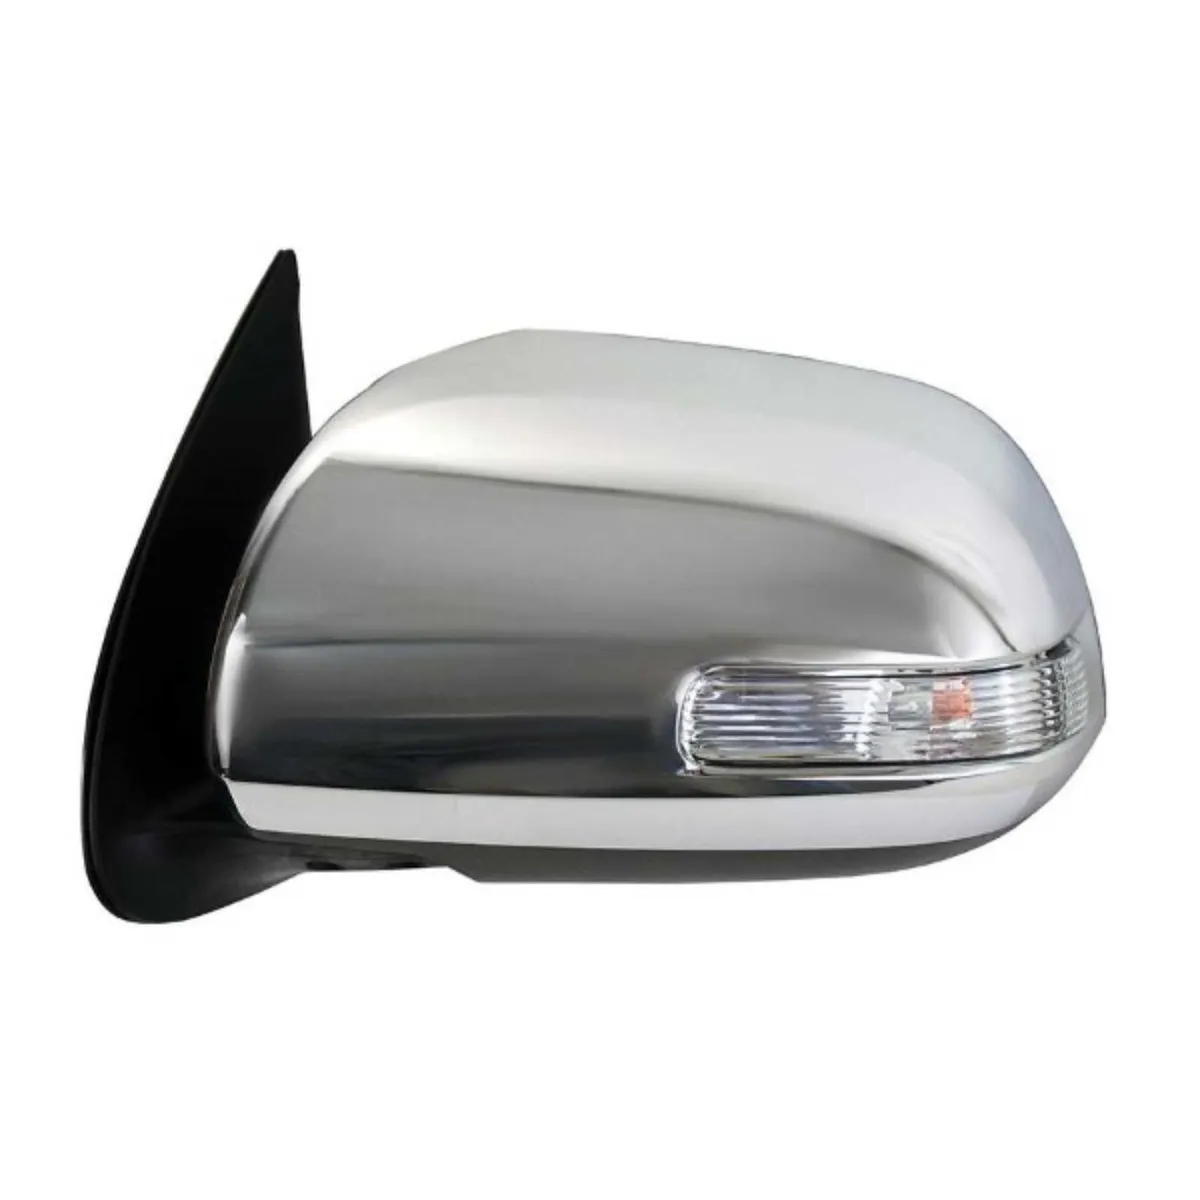 Toyota Hilux 2012-2016 Wing Mirrors Chrome - Image 1